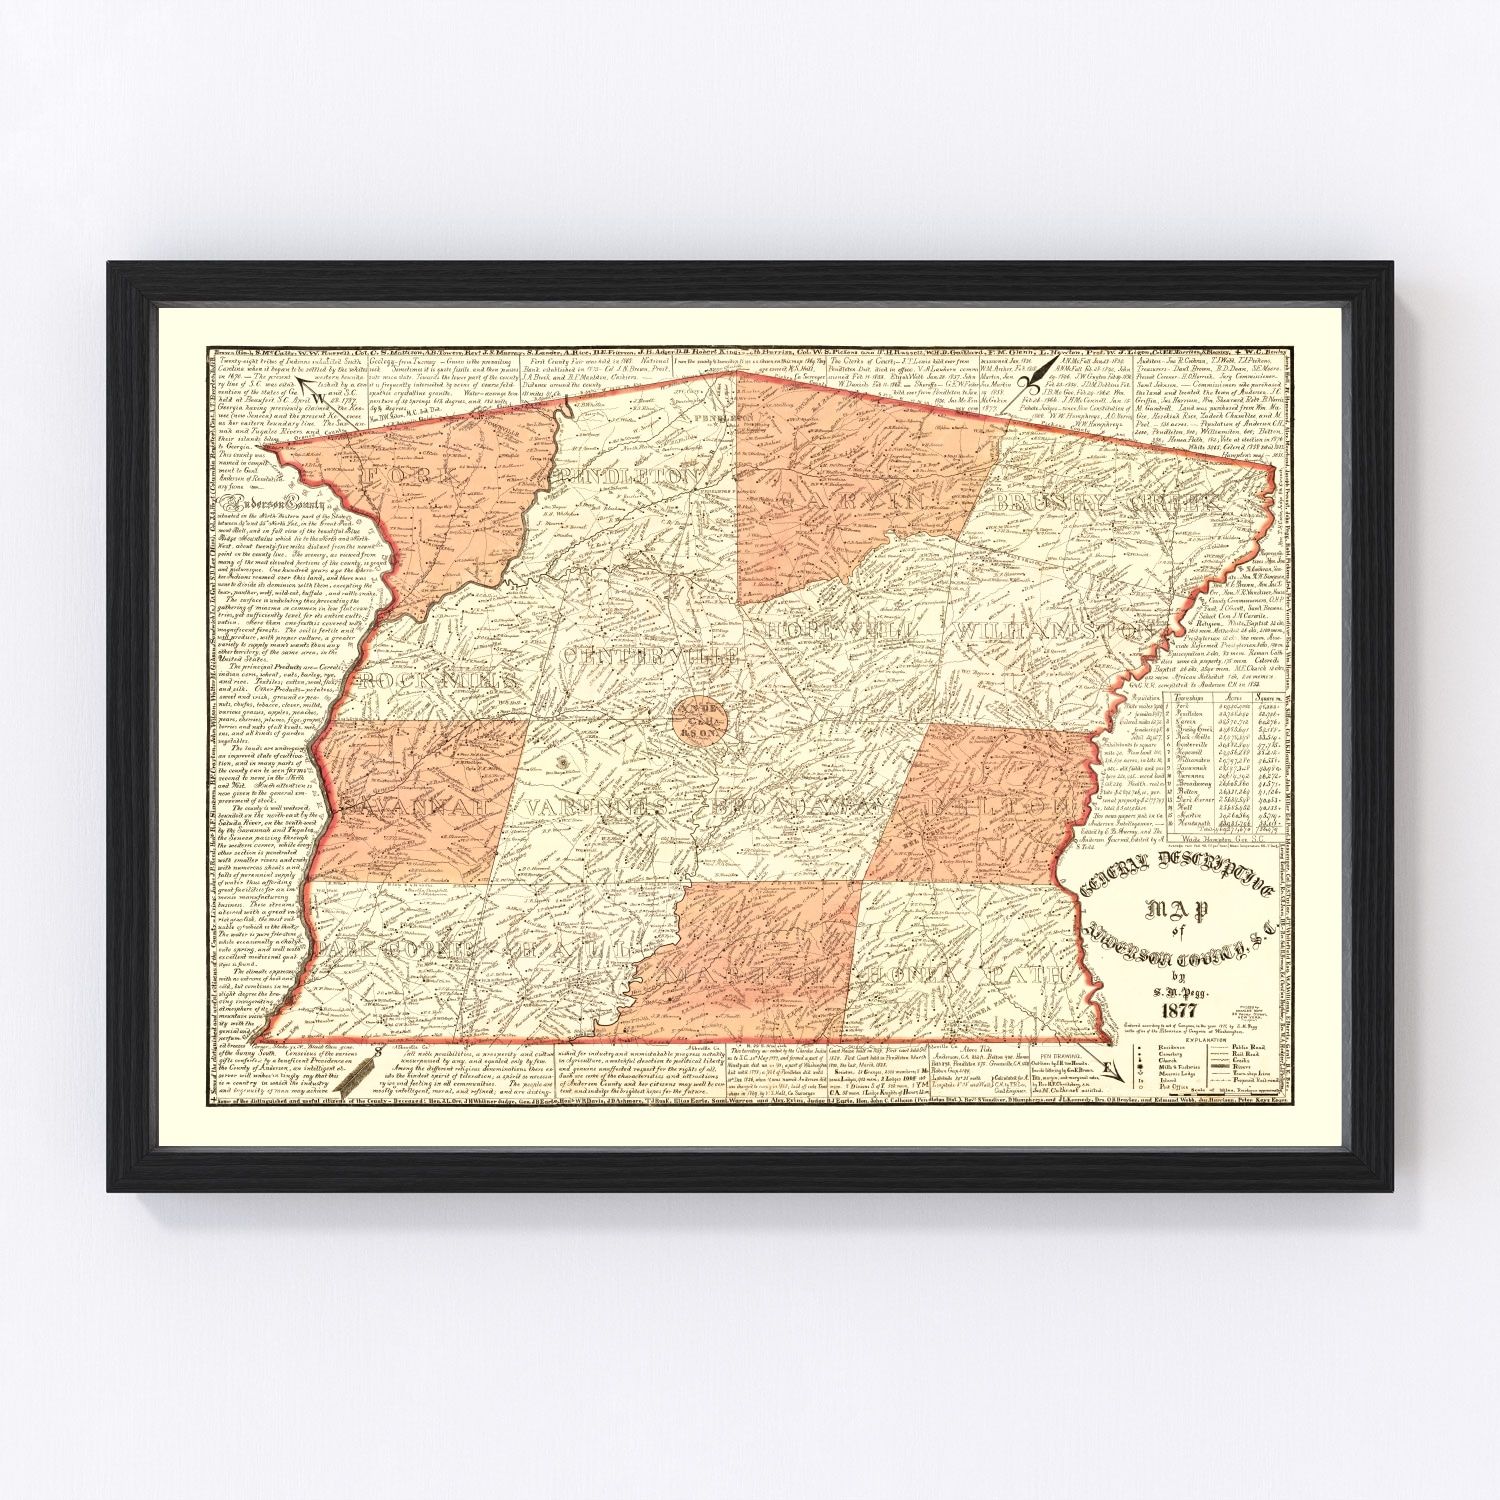 vintage-map-of-anderson-county-south-carolina-1877-by-ted-s-vintage-art